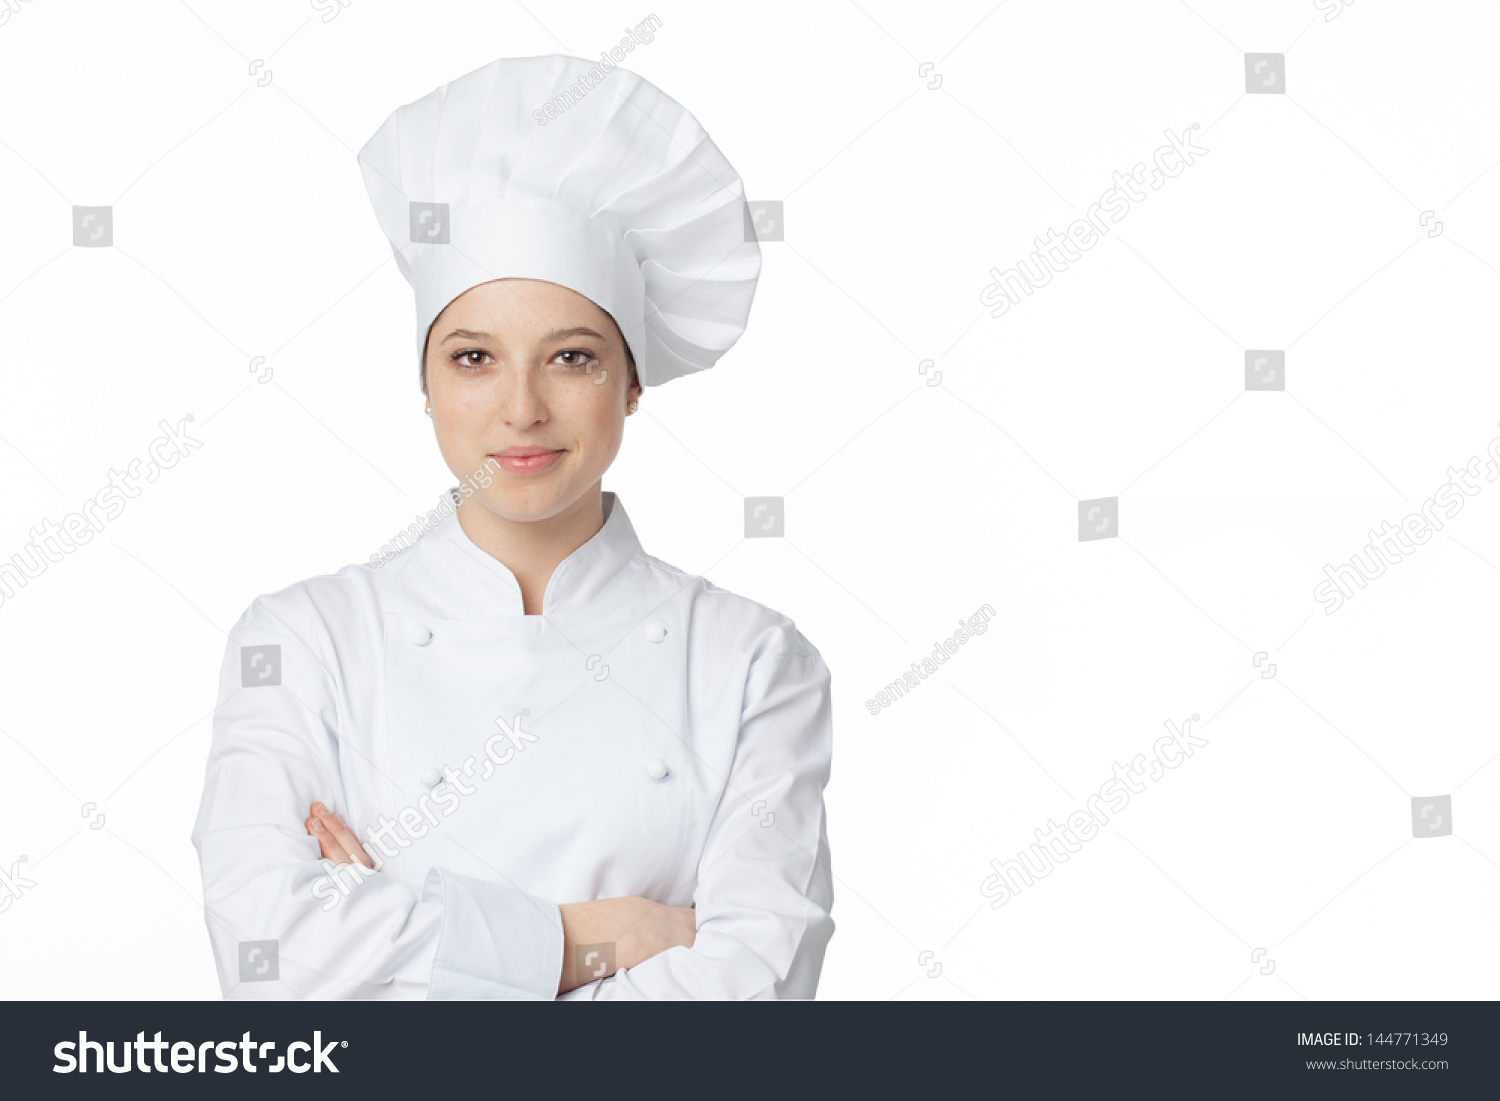 Young Female Chef Traditional Hat Coat Stock Photo 144771349 - Shutterstock